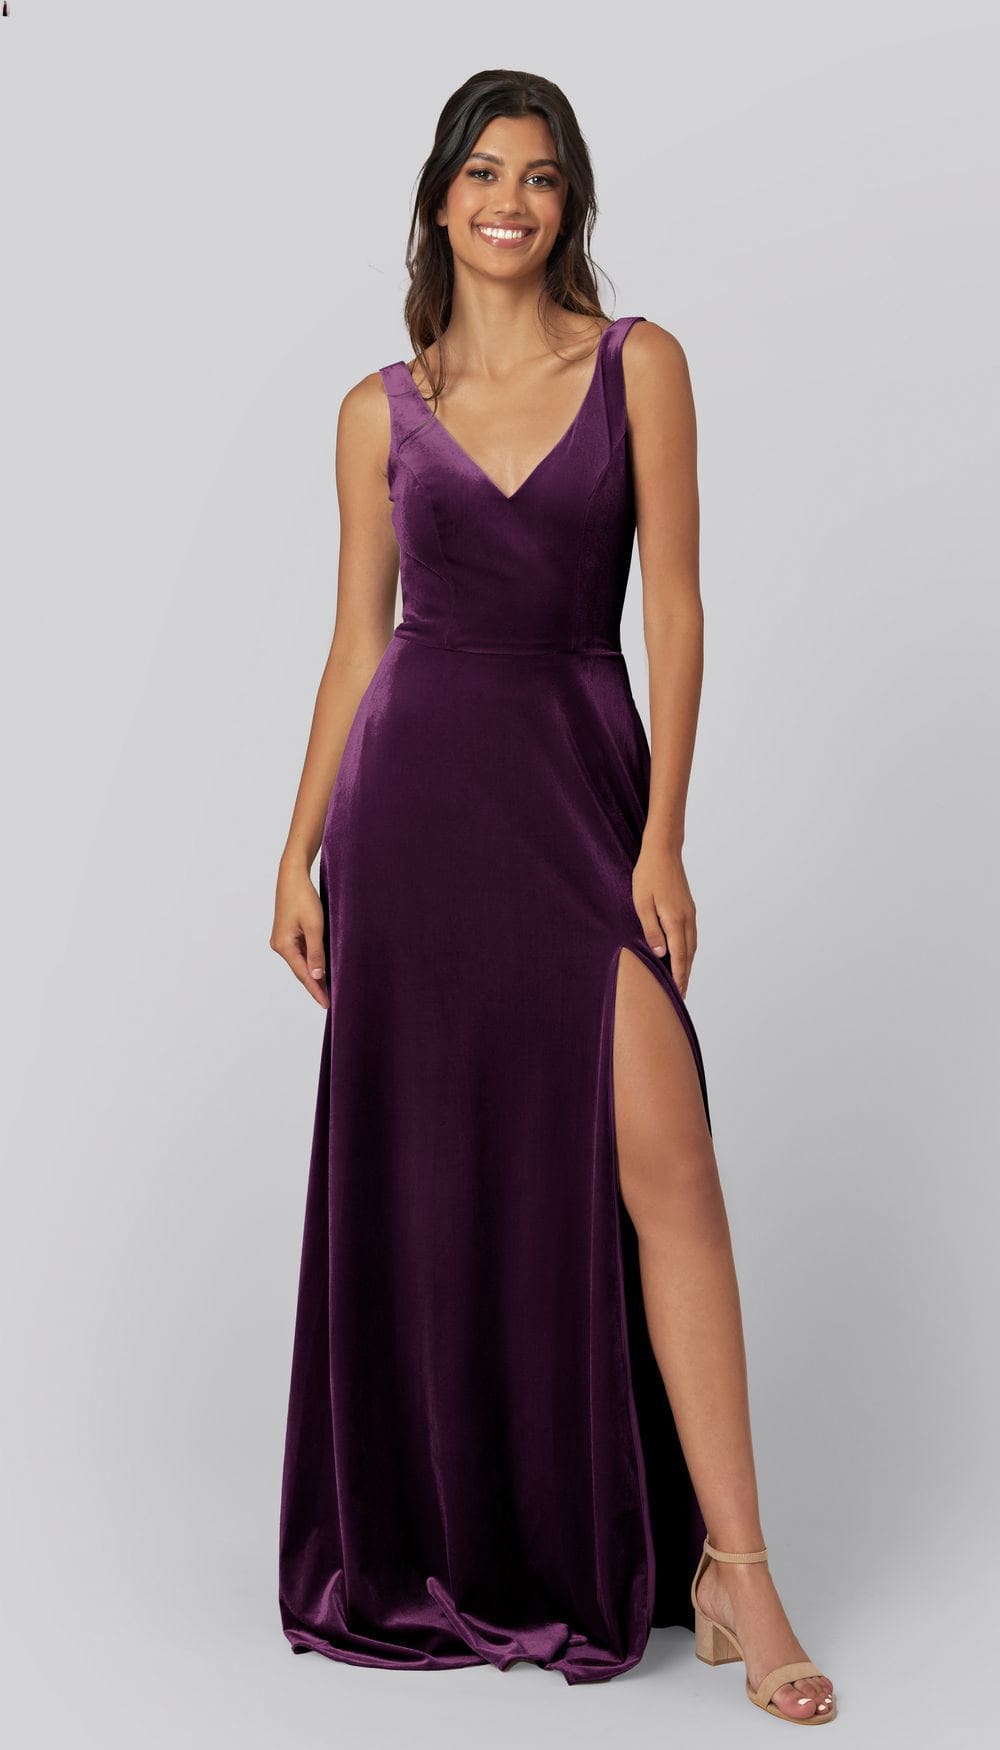 Ash Cowl Neck Bridesmaid Dress with Slit in Rosewood